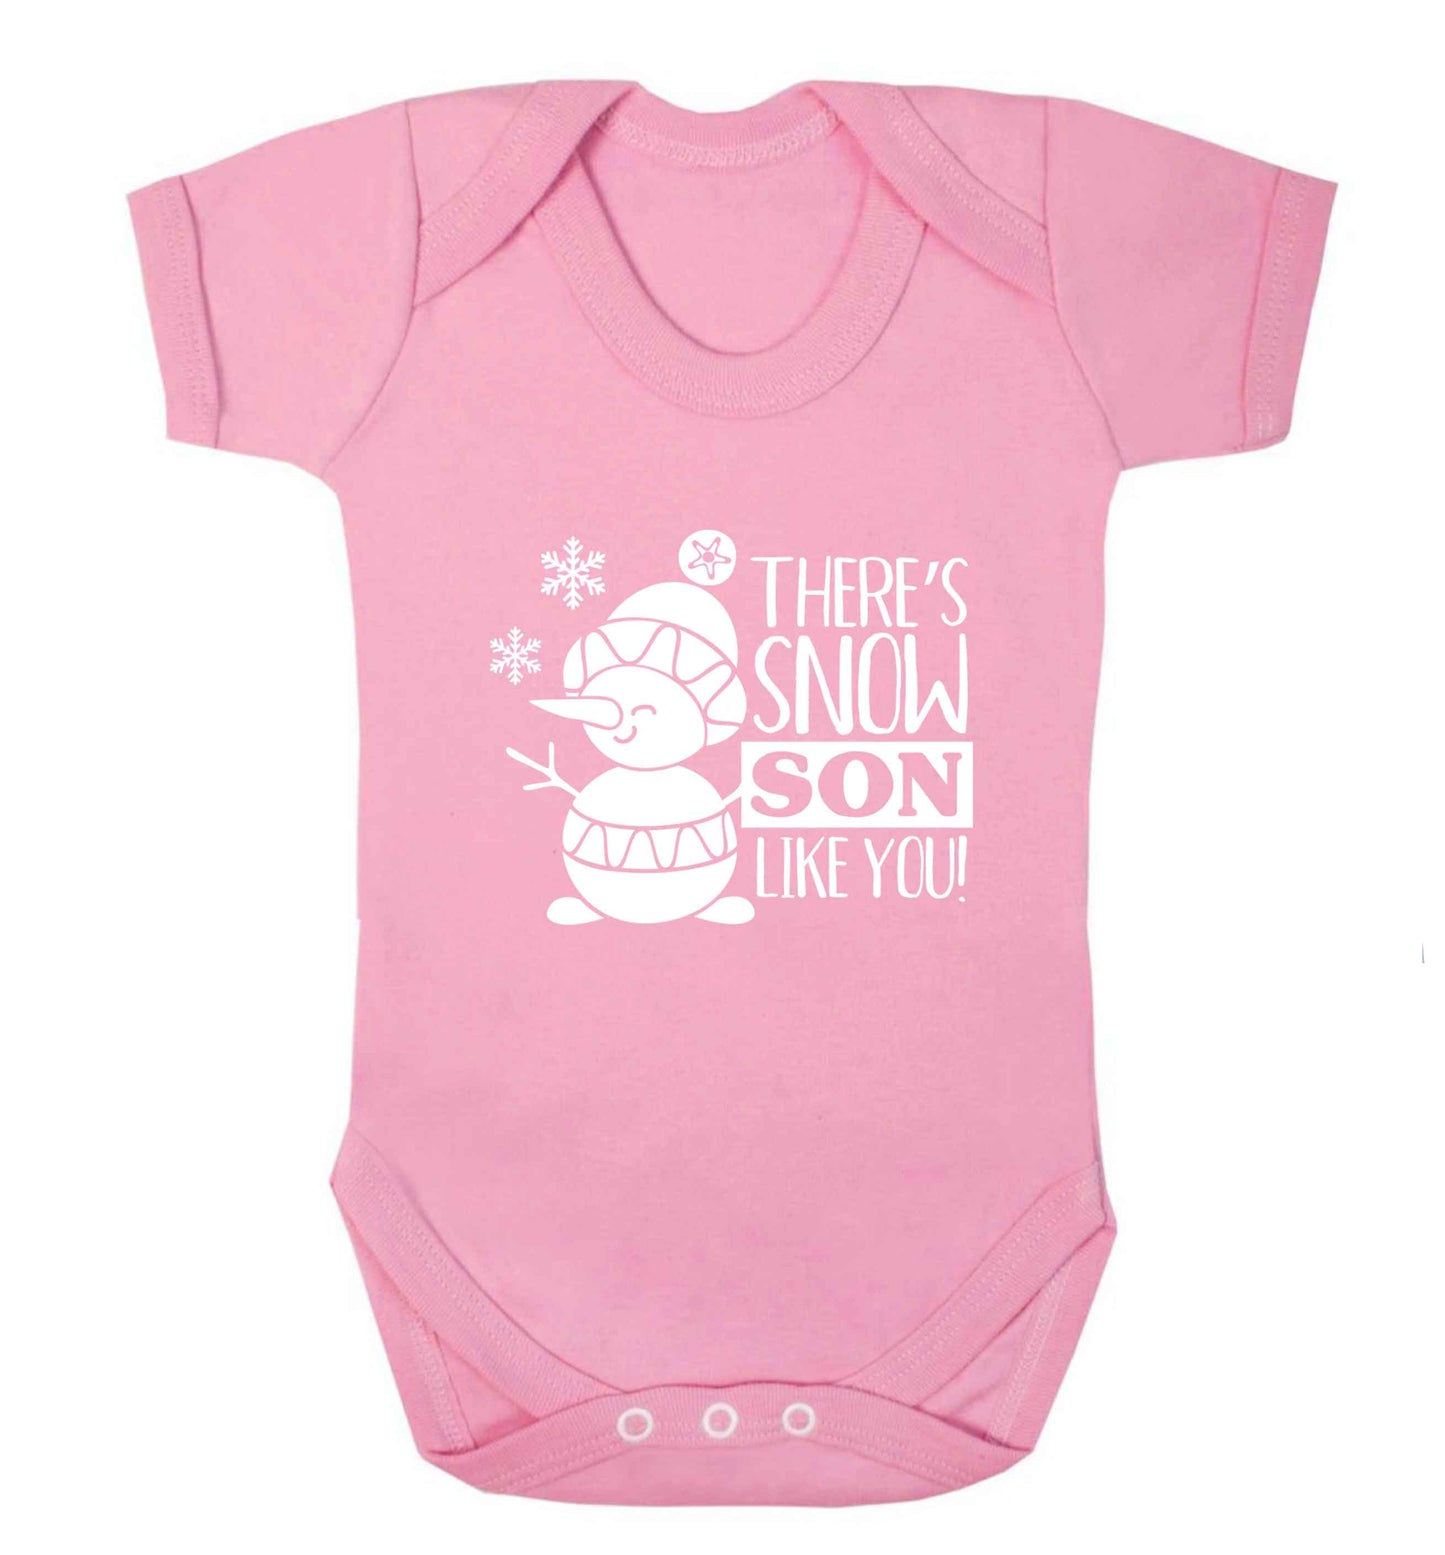 There's snow son like you baby vest pale pink 18-24 months